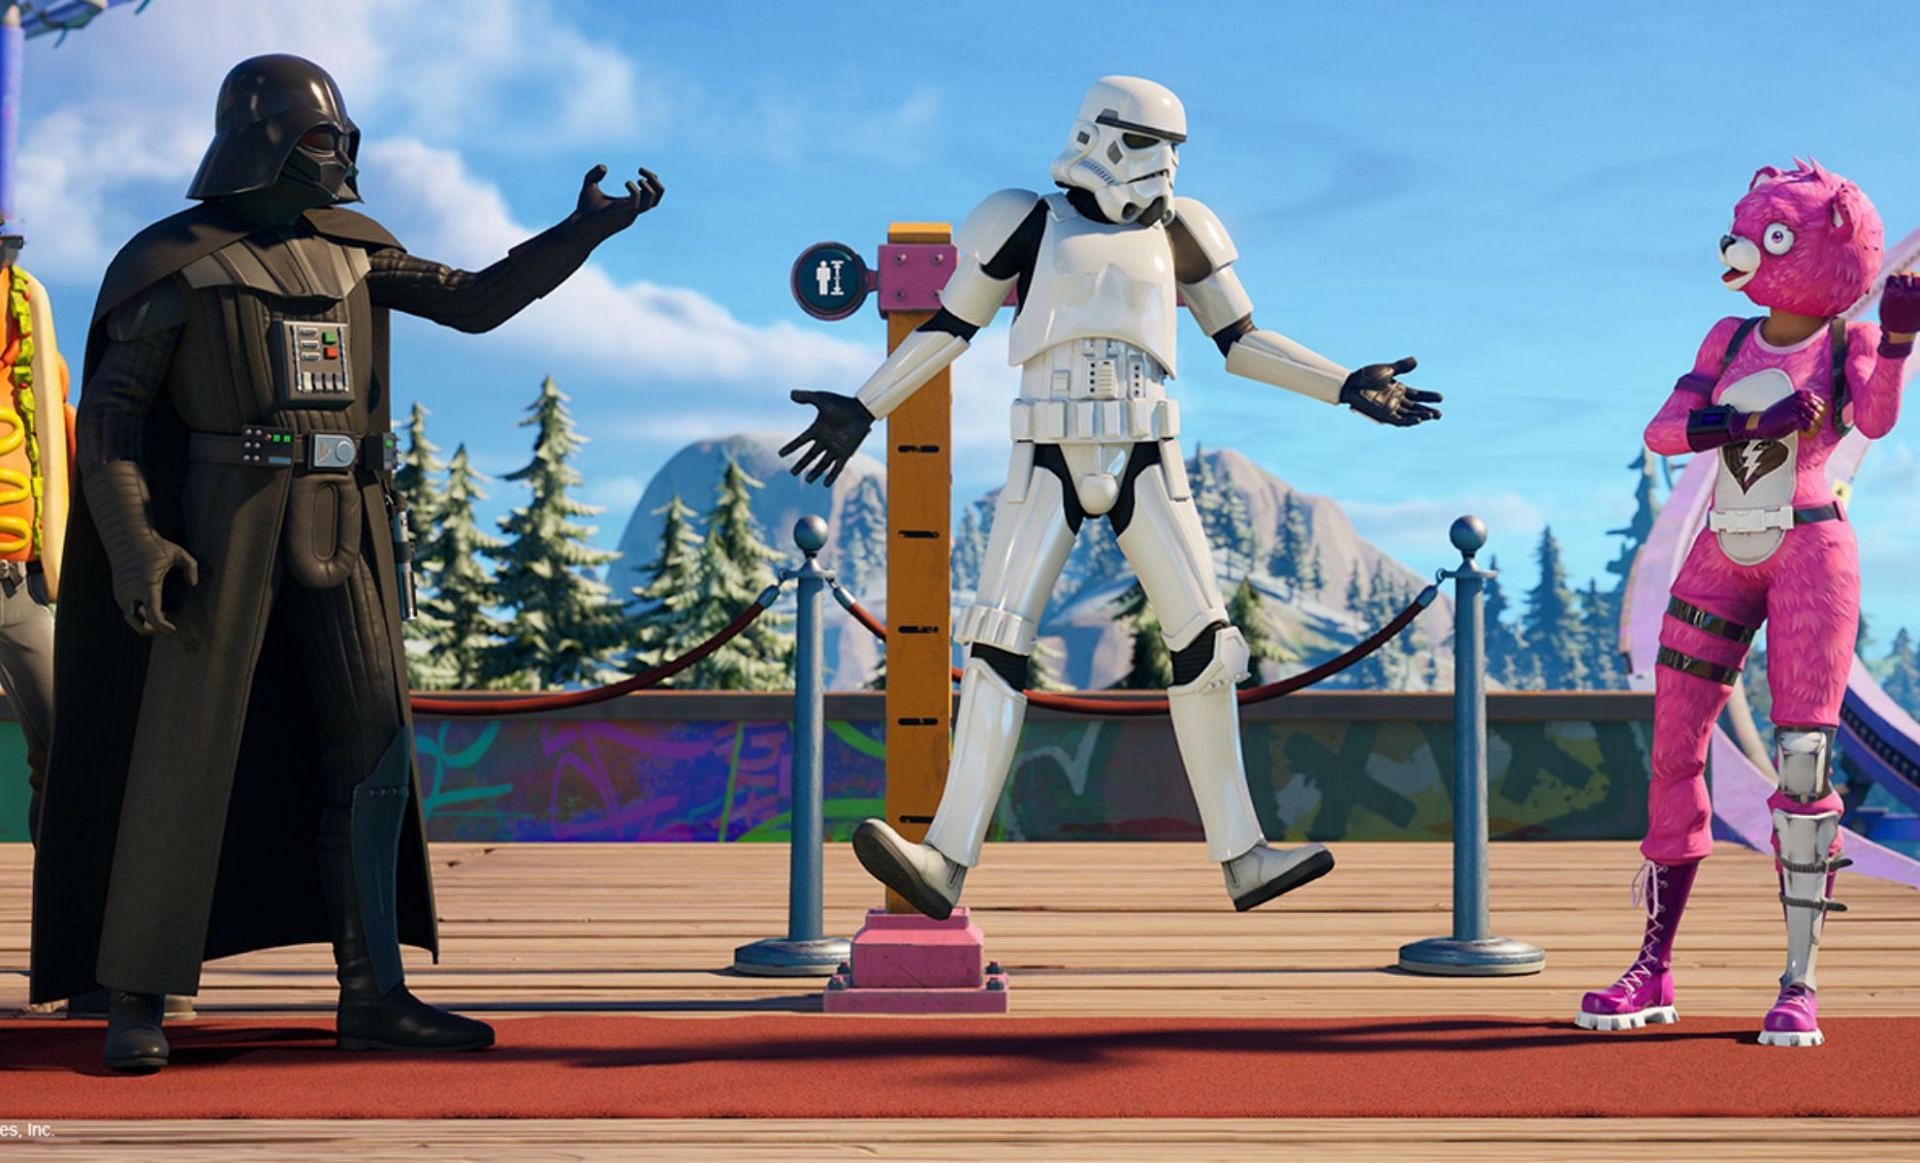 Getting the lightsaber is proving to be a task in Fortnite (Image via Epic Games)